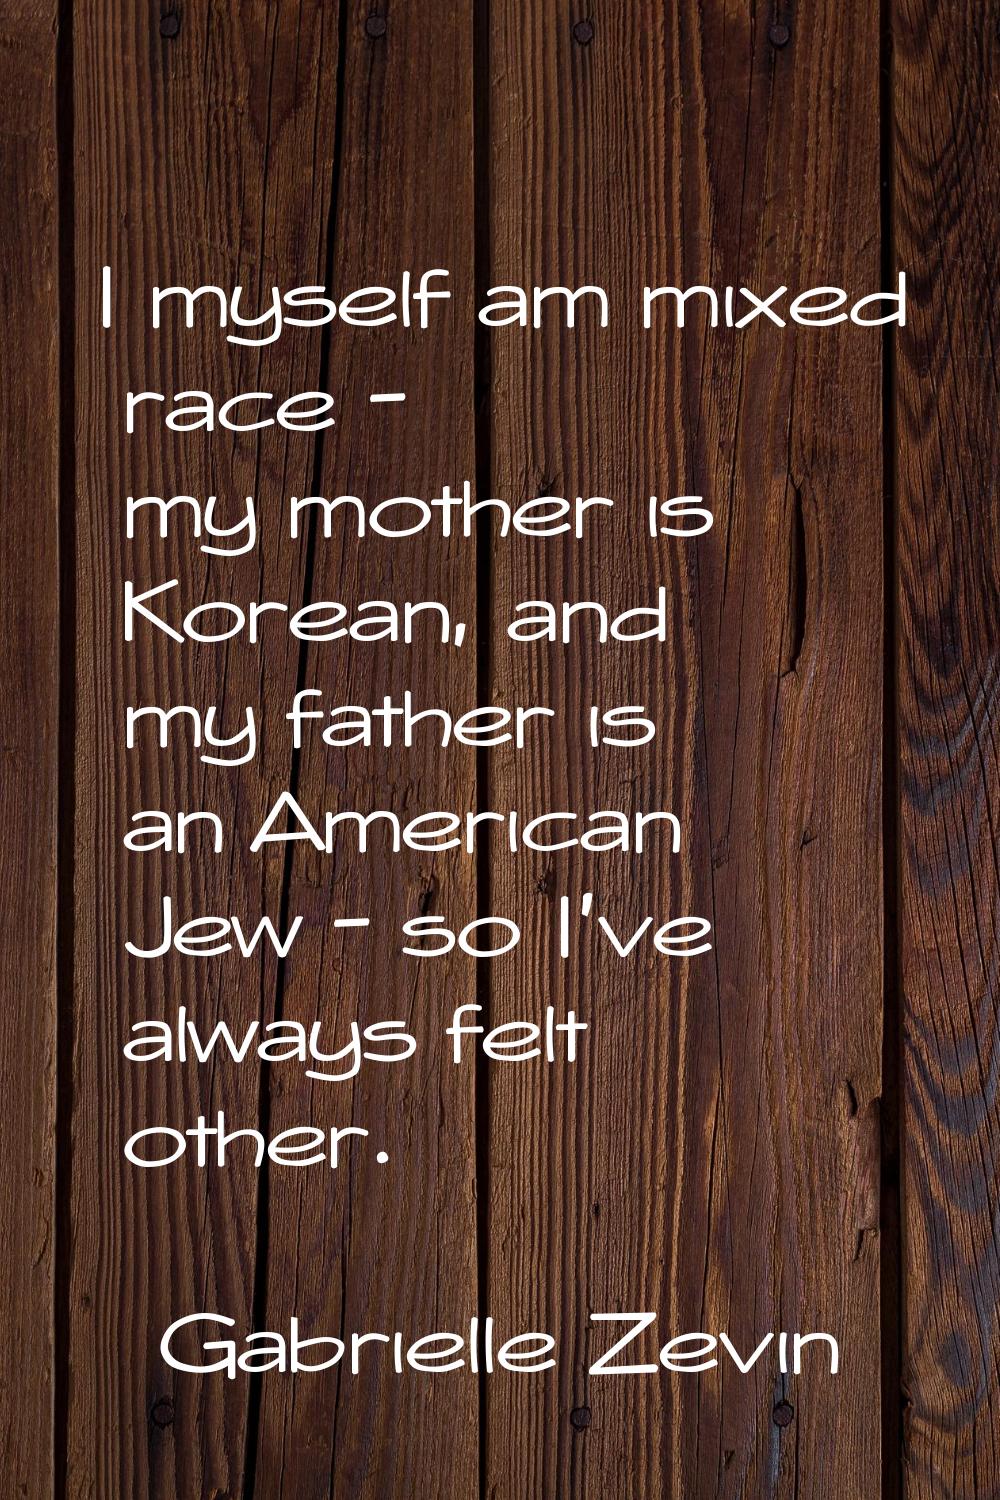 I myself am mixed race - my mother is Korean, and my father is an American Jew - so I've always fel